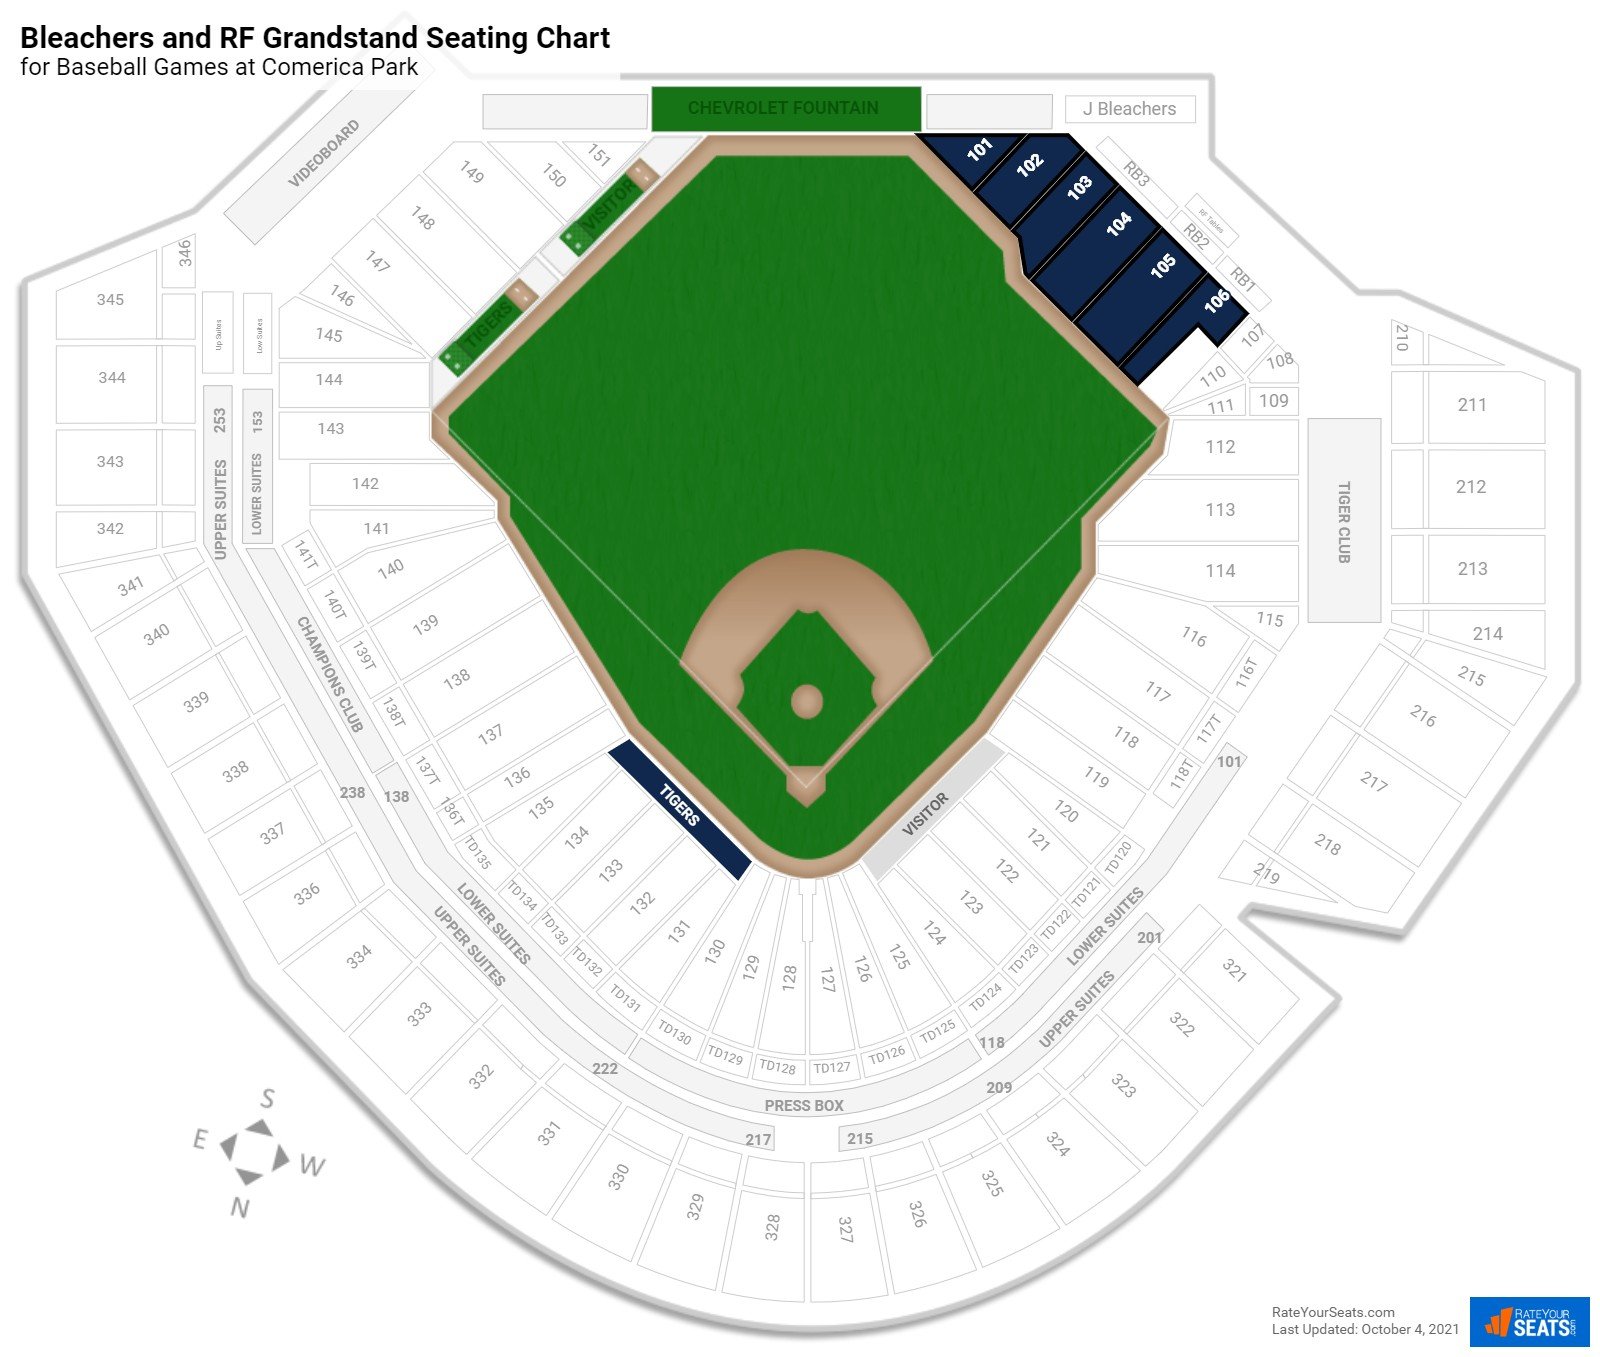 Baseball Bleachers and RF Grandstand Seating Chart at Comerica Park